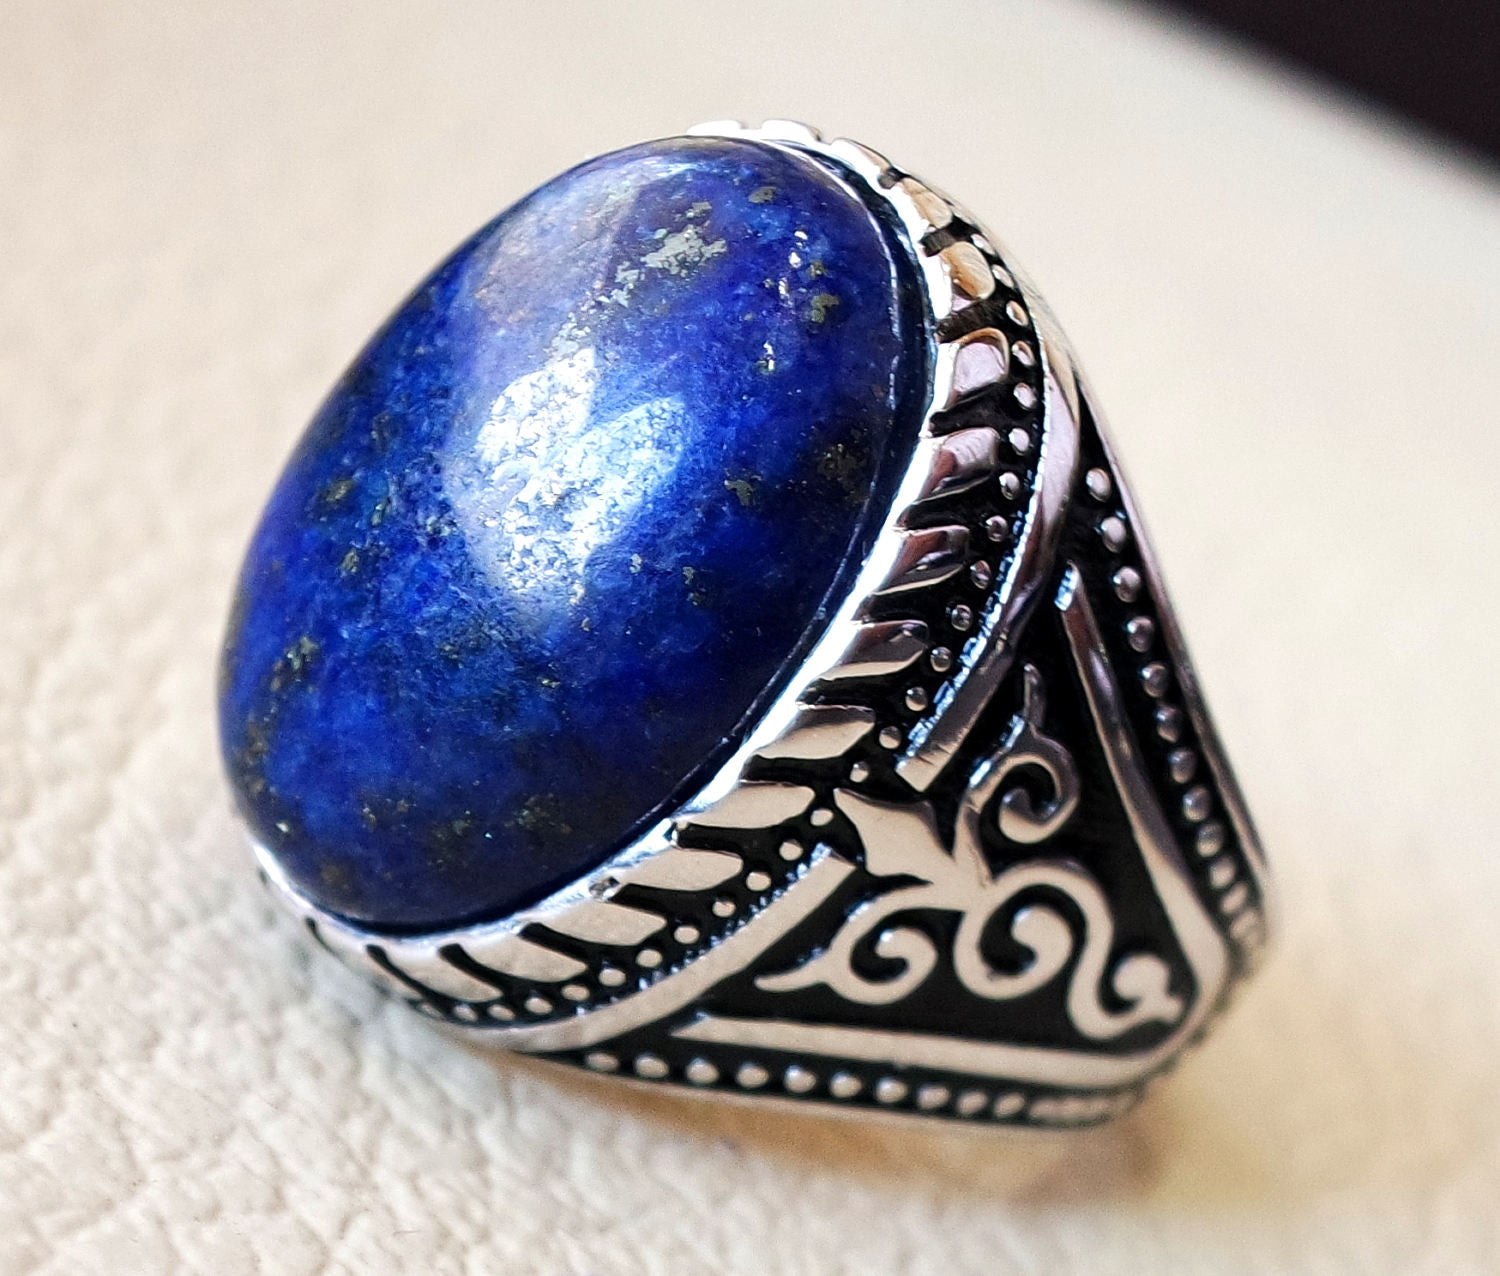 man ring lapis lazuli oval cabochon natural dark blue stone  sterling silver 925 men jewelry all sizes 18 * 13 mm antique middle eastern